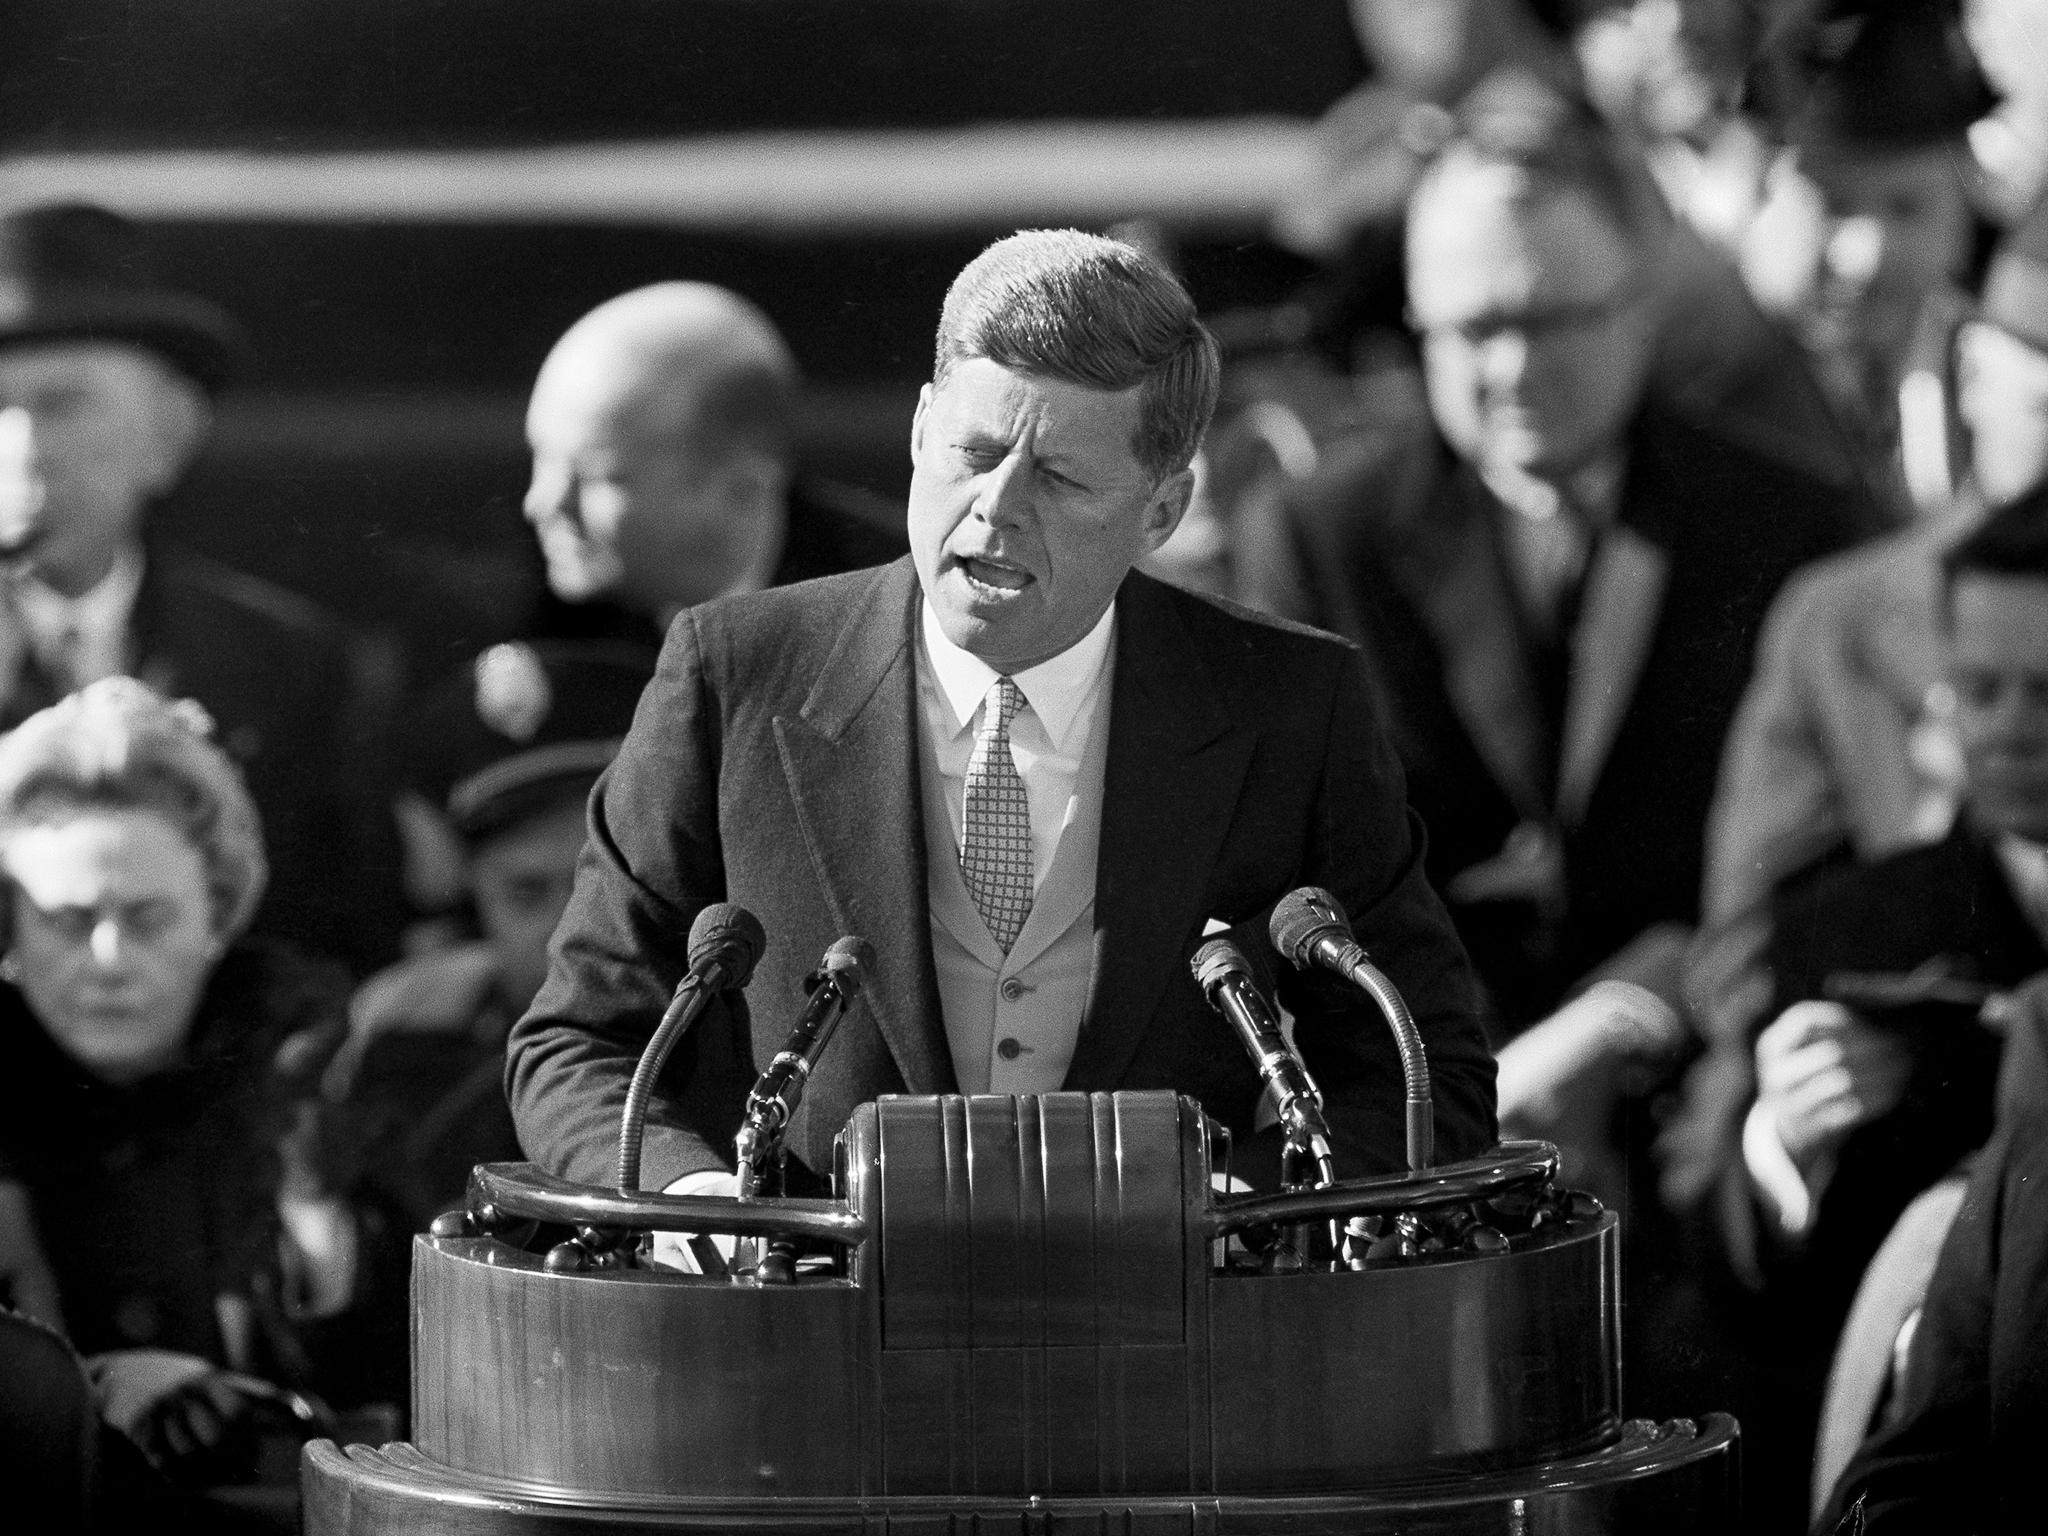 King of the chiasmus: John F Kennedy at his inaugural address in 1961